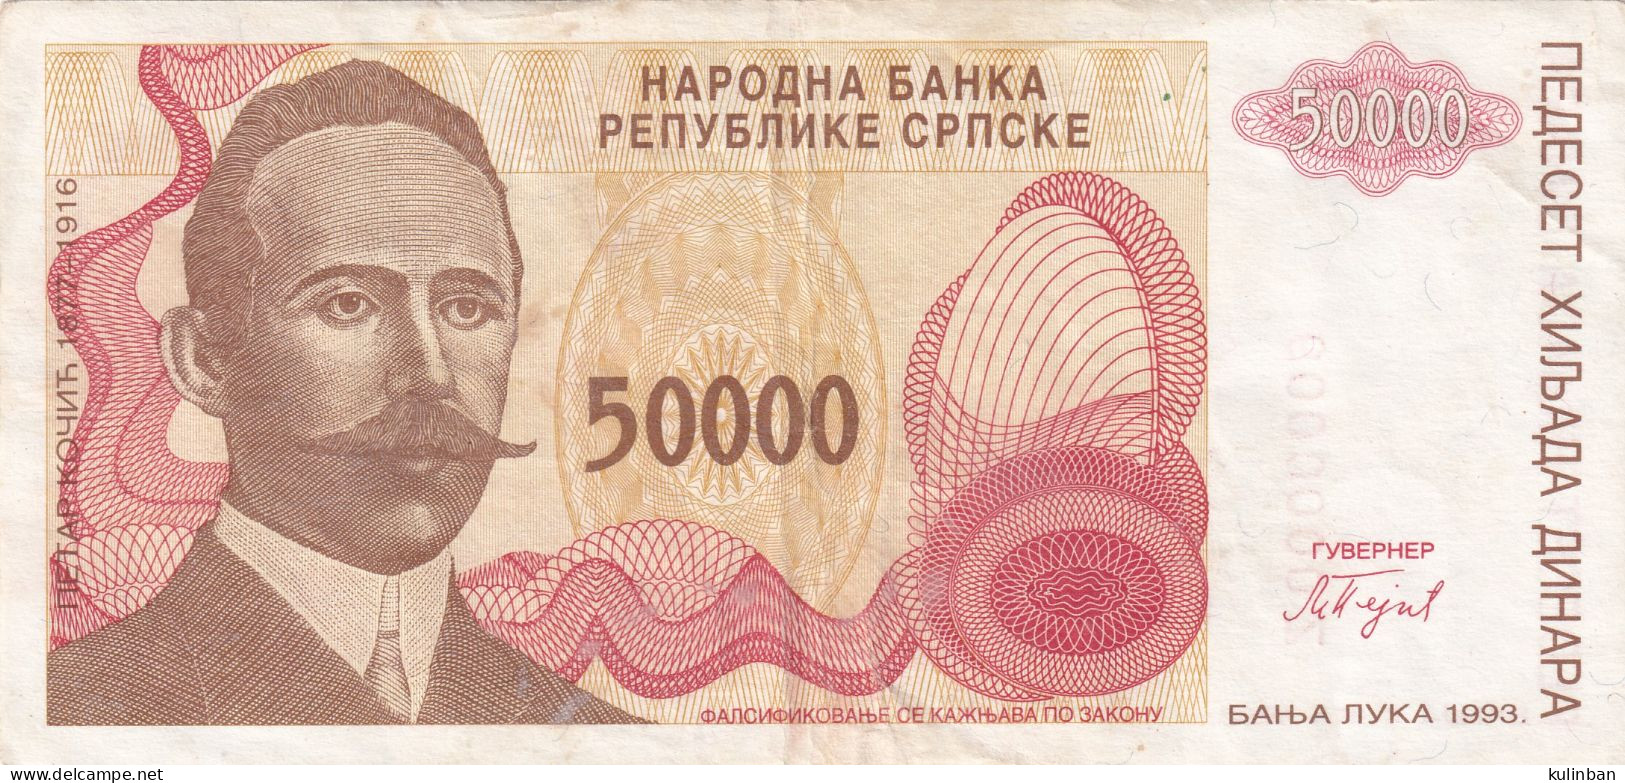 BOSNIA AND HERZEGOVINA, Replacement Banknote, Z 00000009. P-150e,XF, 50.000 DINARA,  BANJA LUKA 1993. - Bosnia And Herzegovina